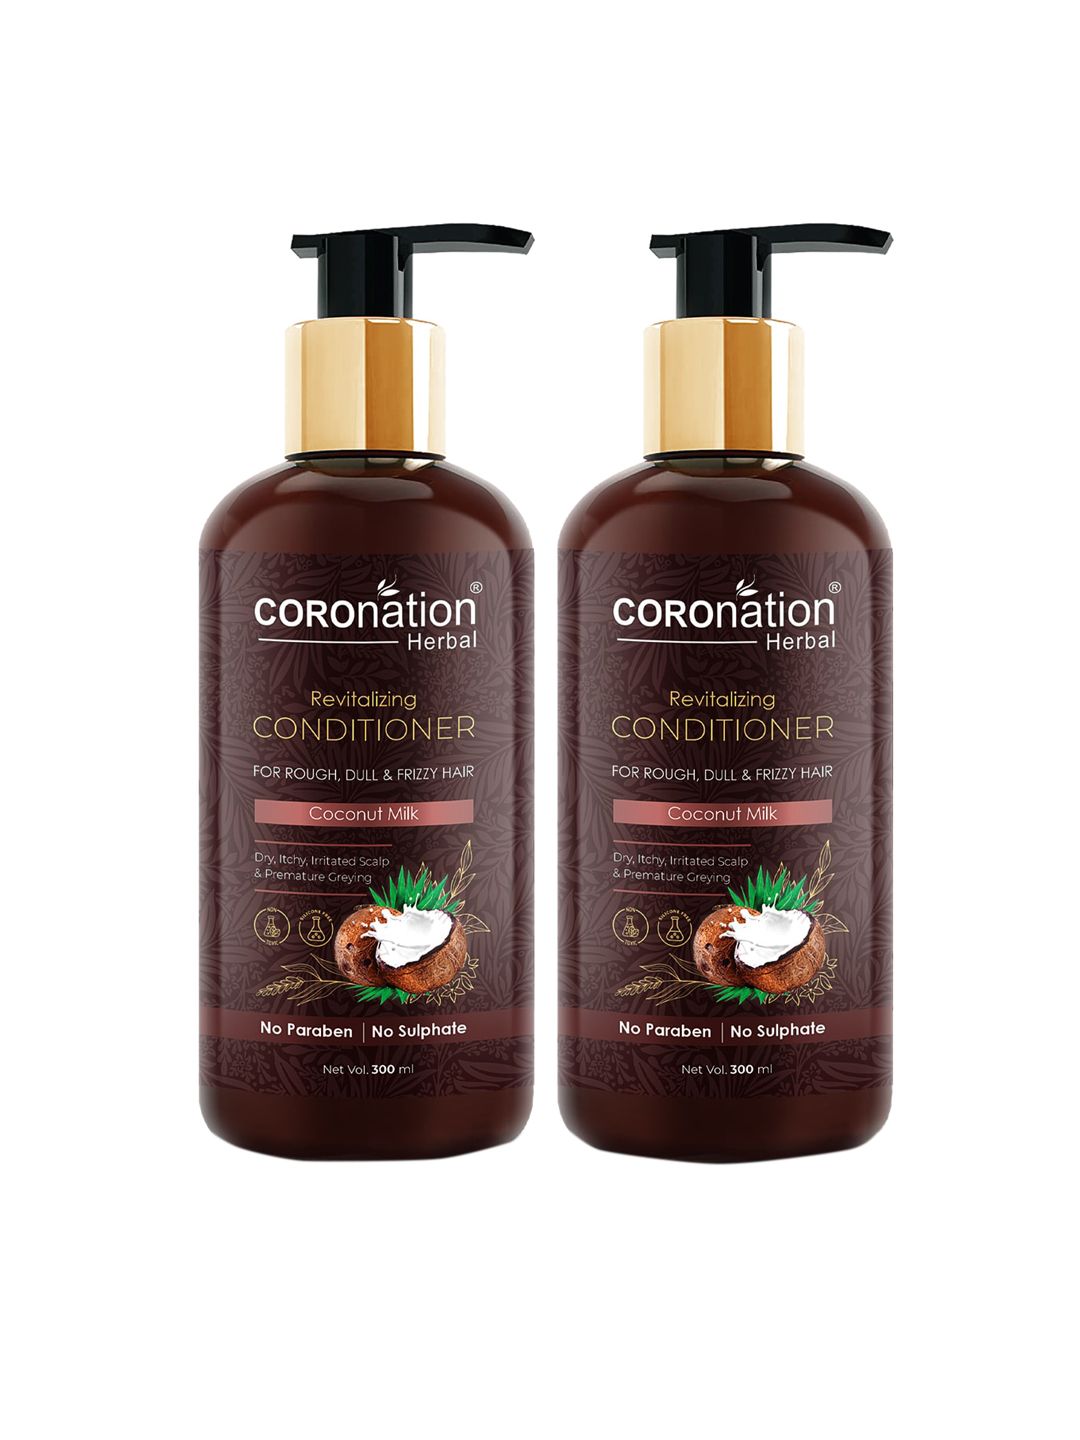 COROnation Herbal Set of 2 Hair Conditioner 600ml Price in India